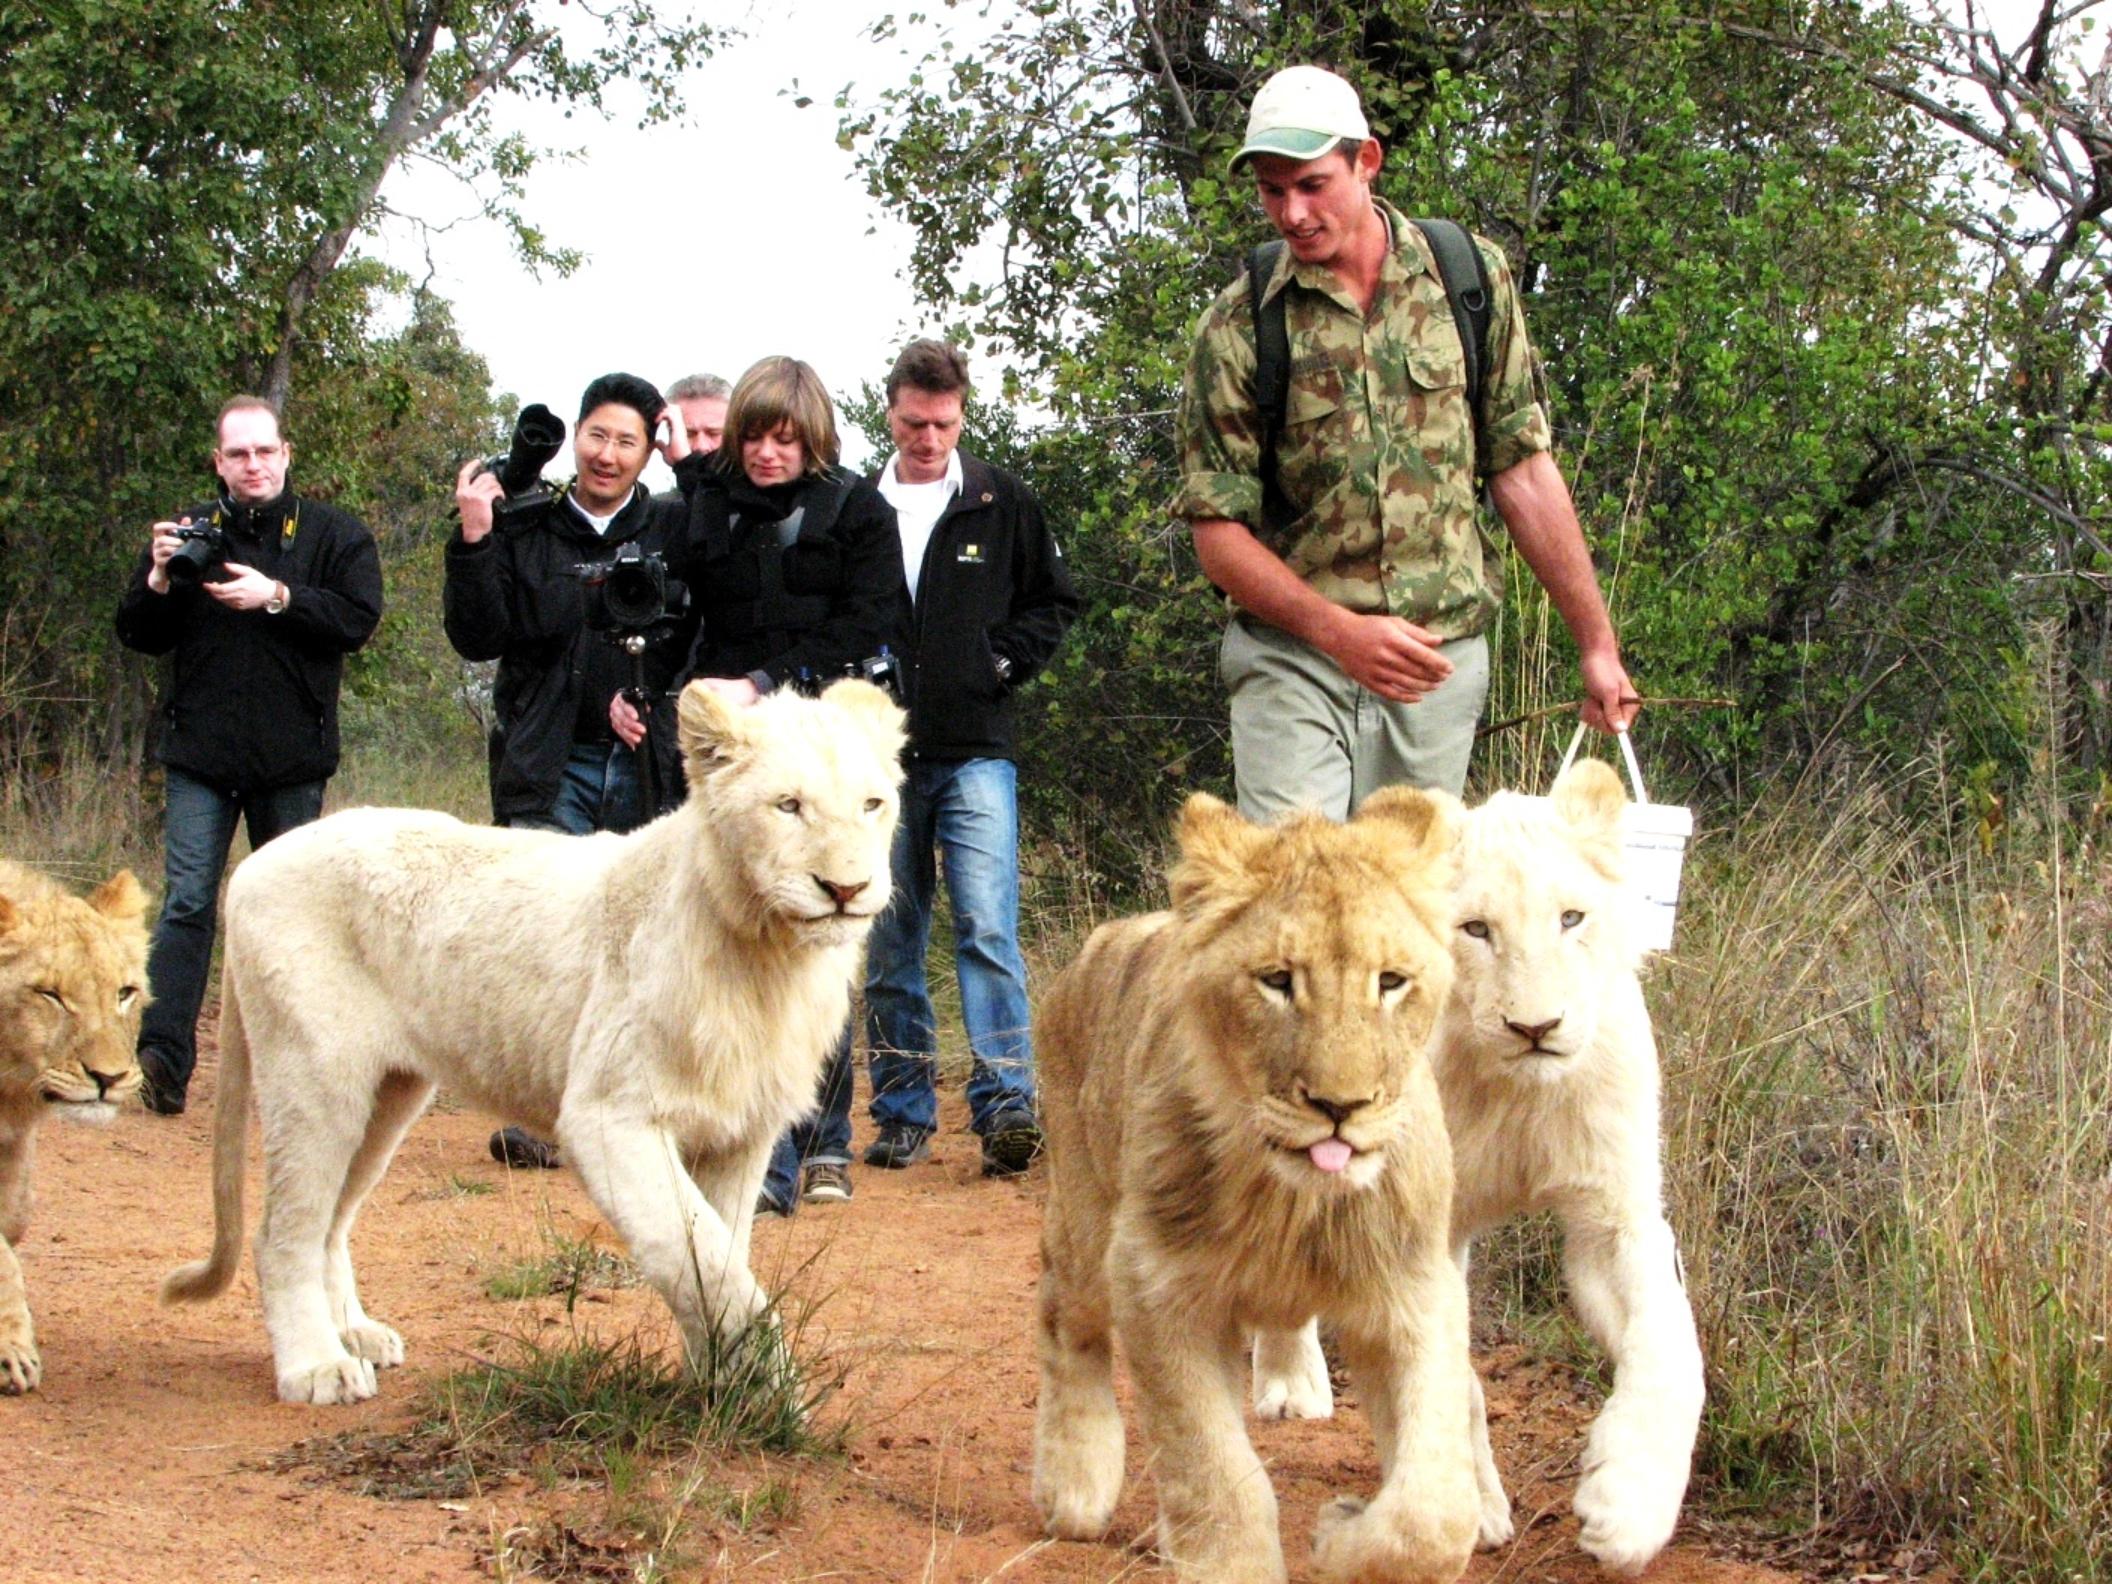 Walk with the lions at the Ukutula Lodge – from Johannesburg